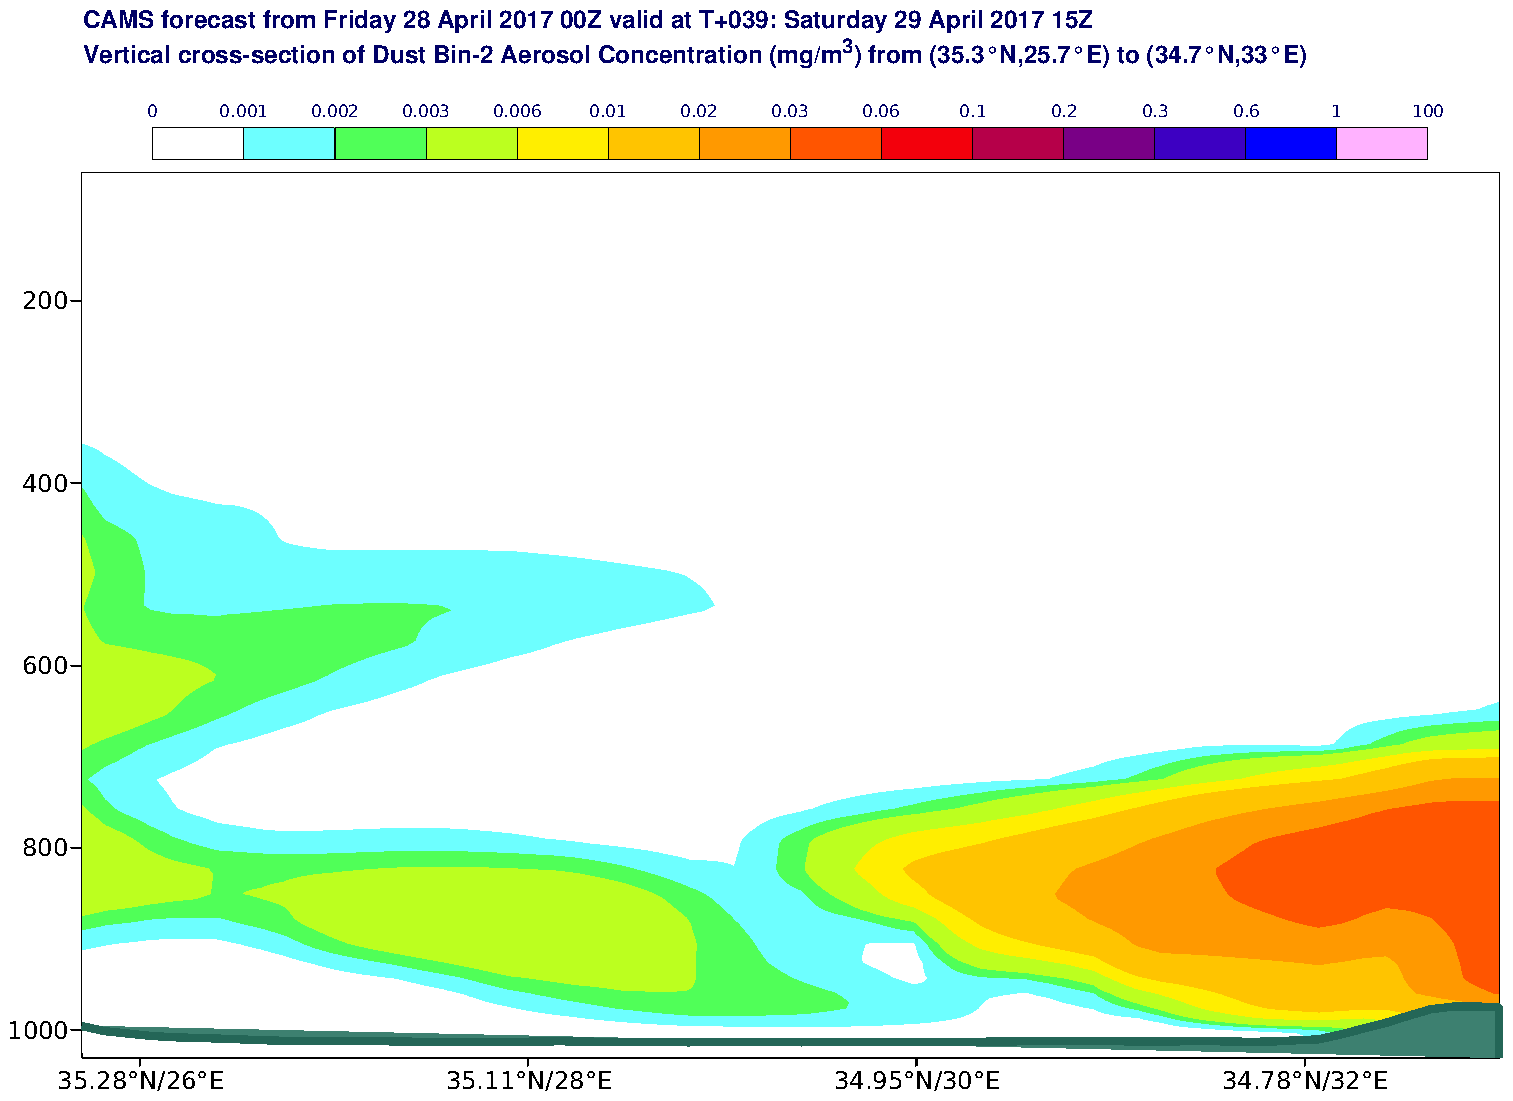 Vertical cross-section of Dust Bin-2 Aerosol Concentration (mg/m3) valid at T39 - 2017-04-29 15:00